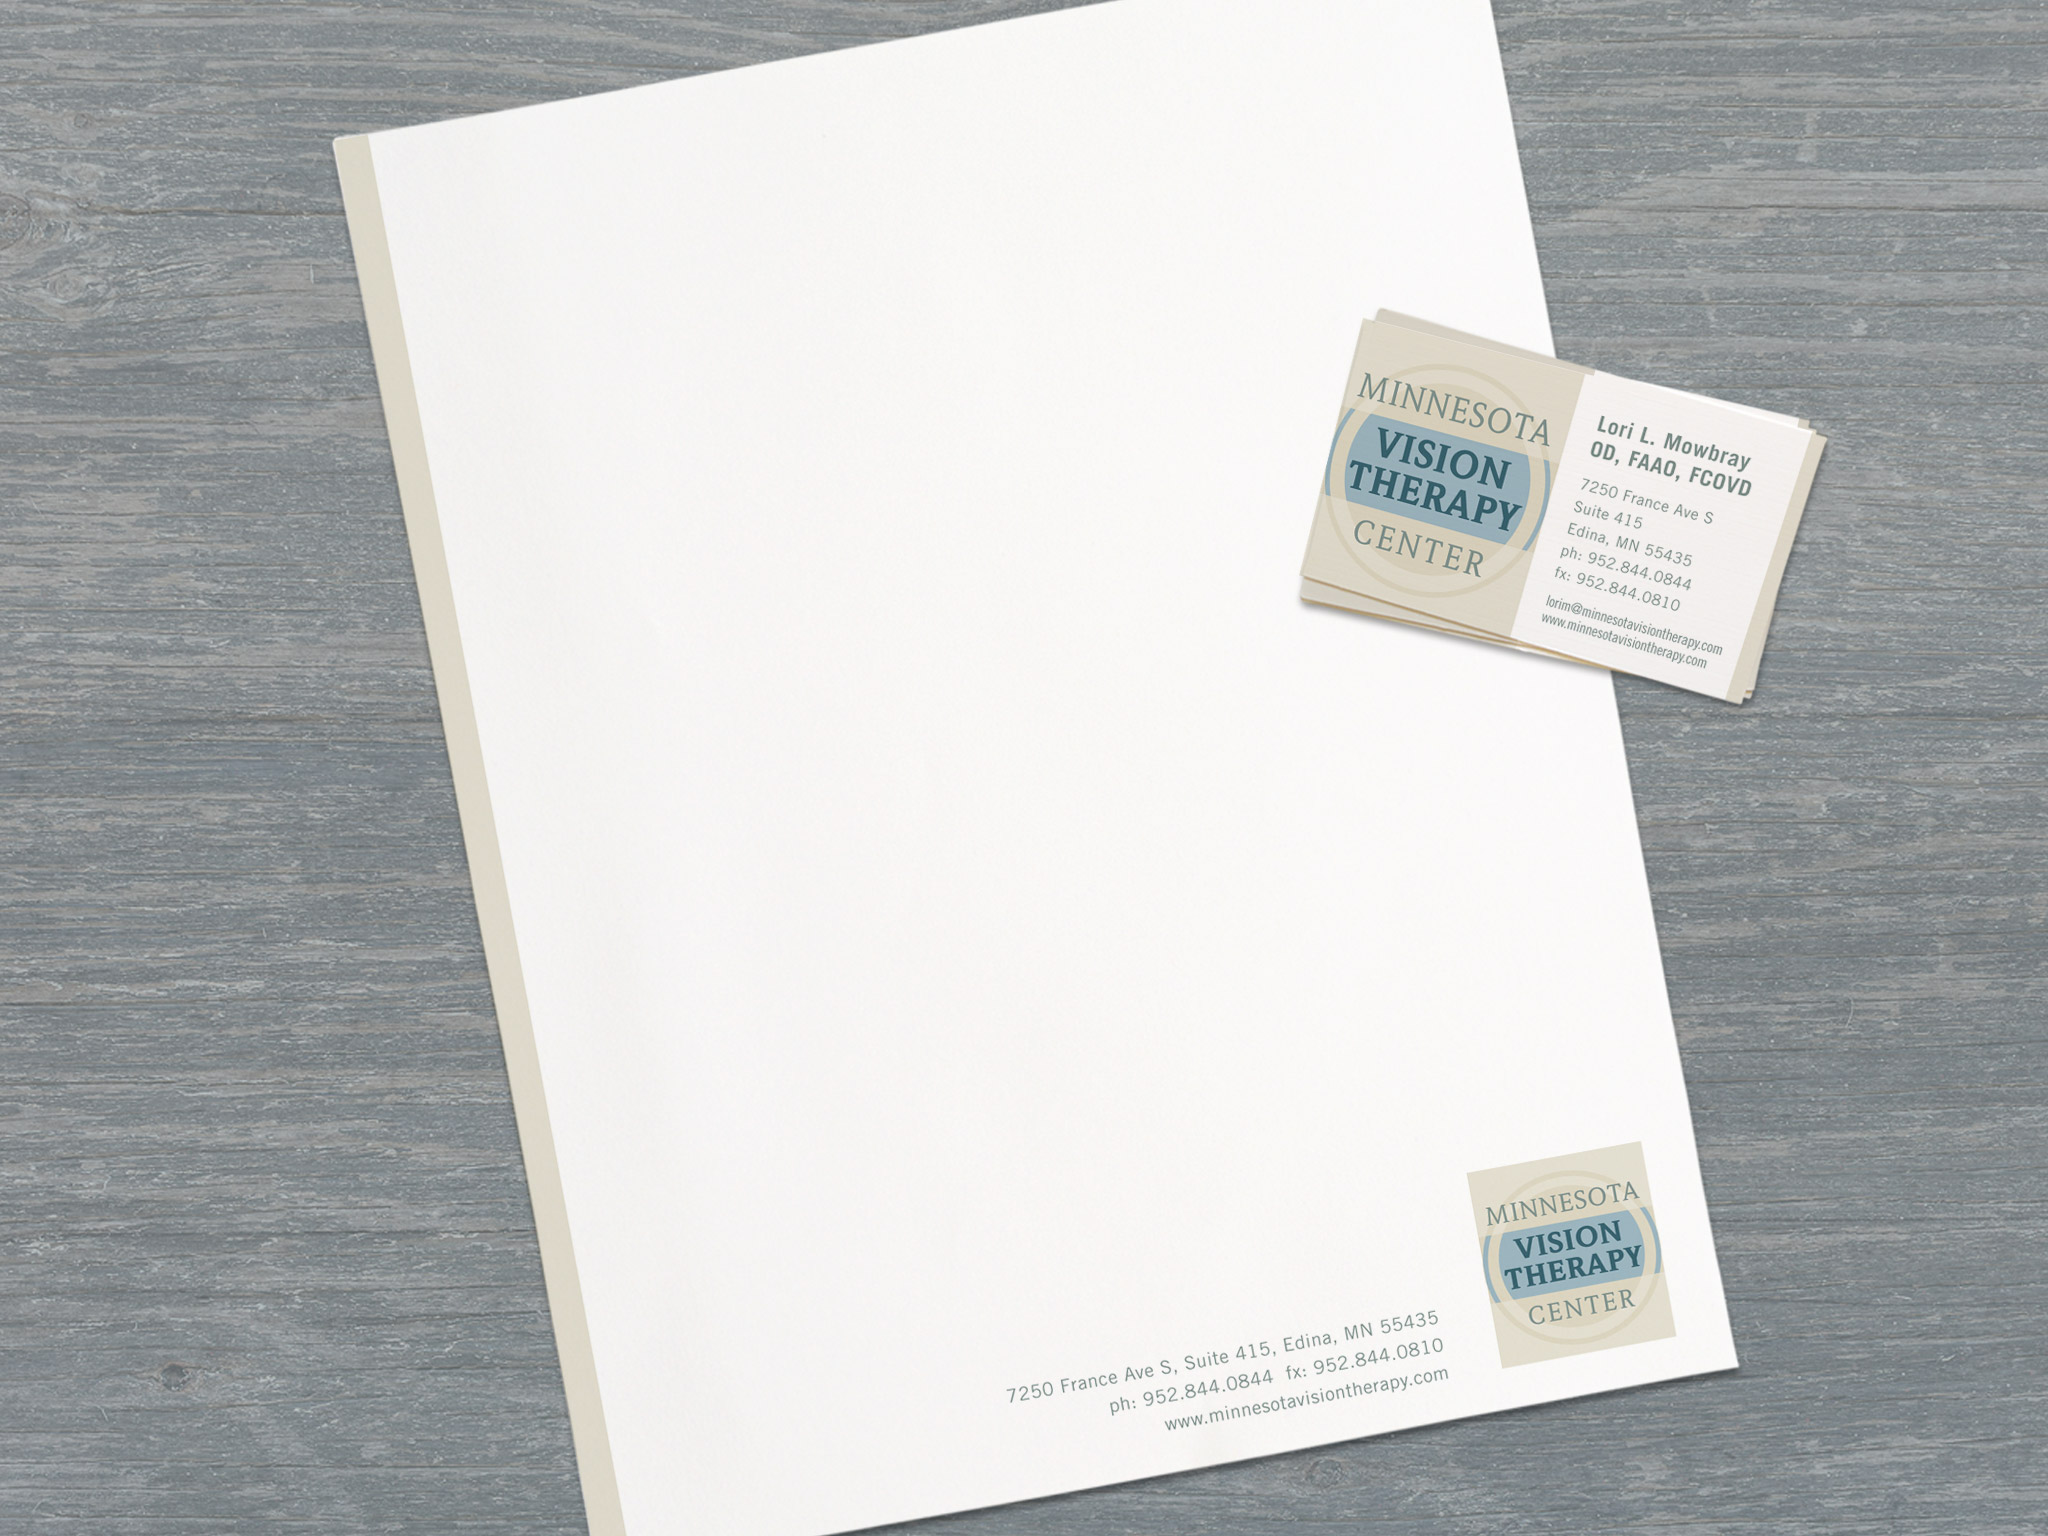 Minnesota Vision Therapy Center Stationery